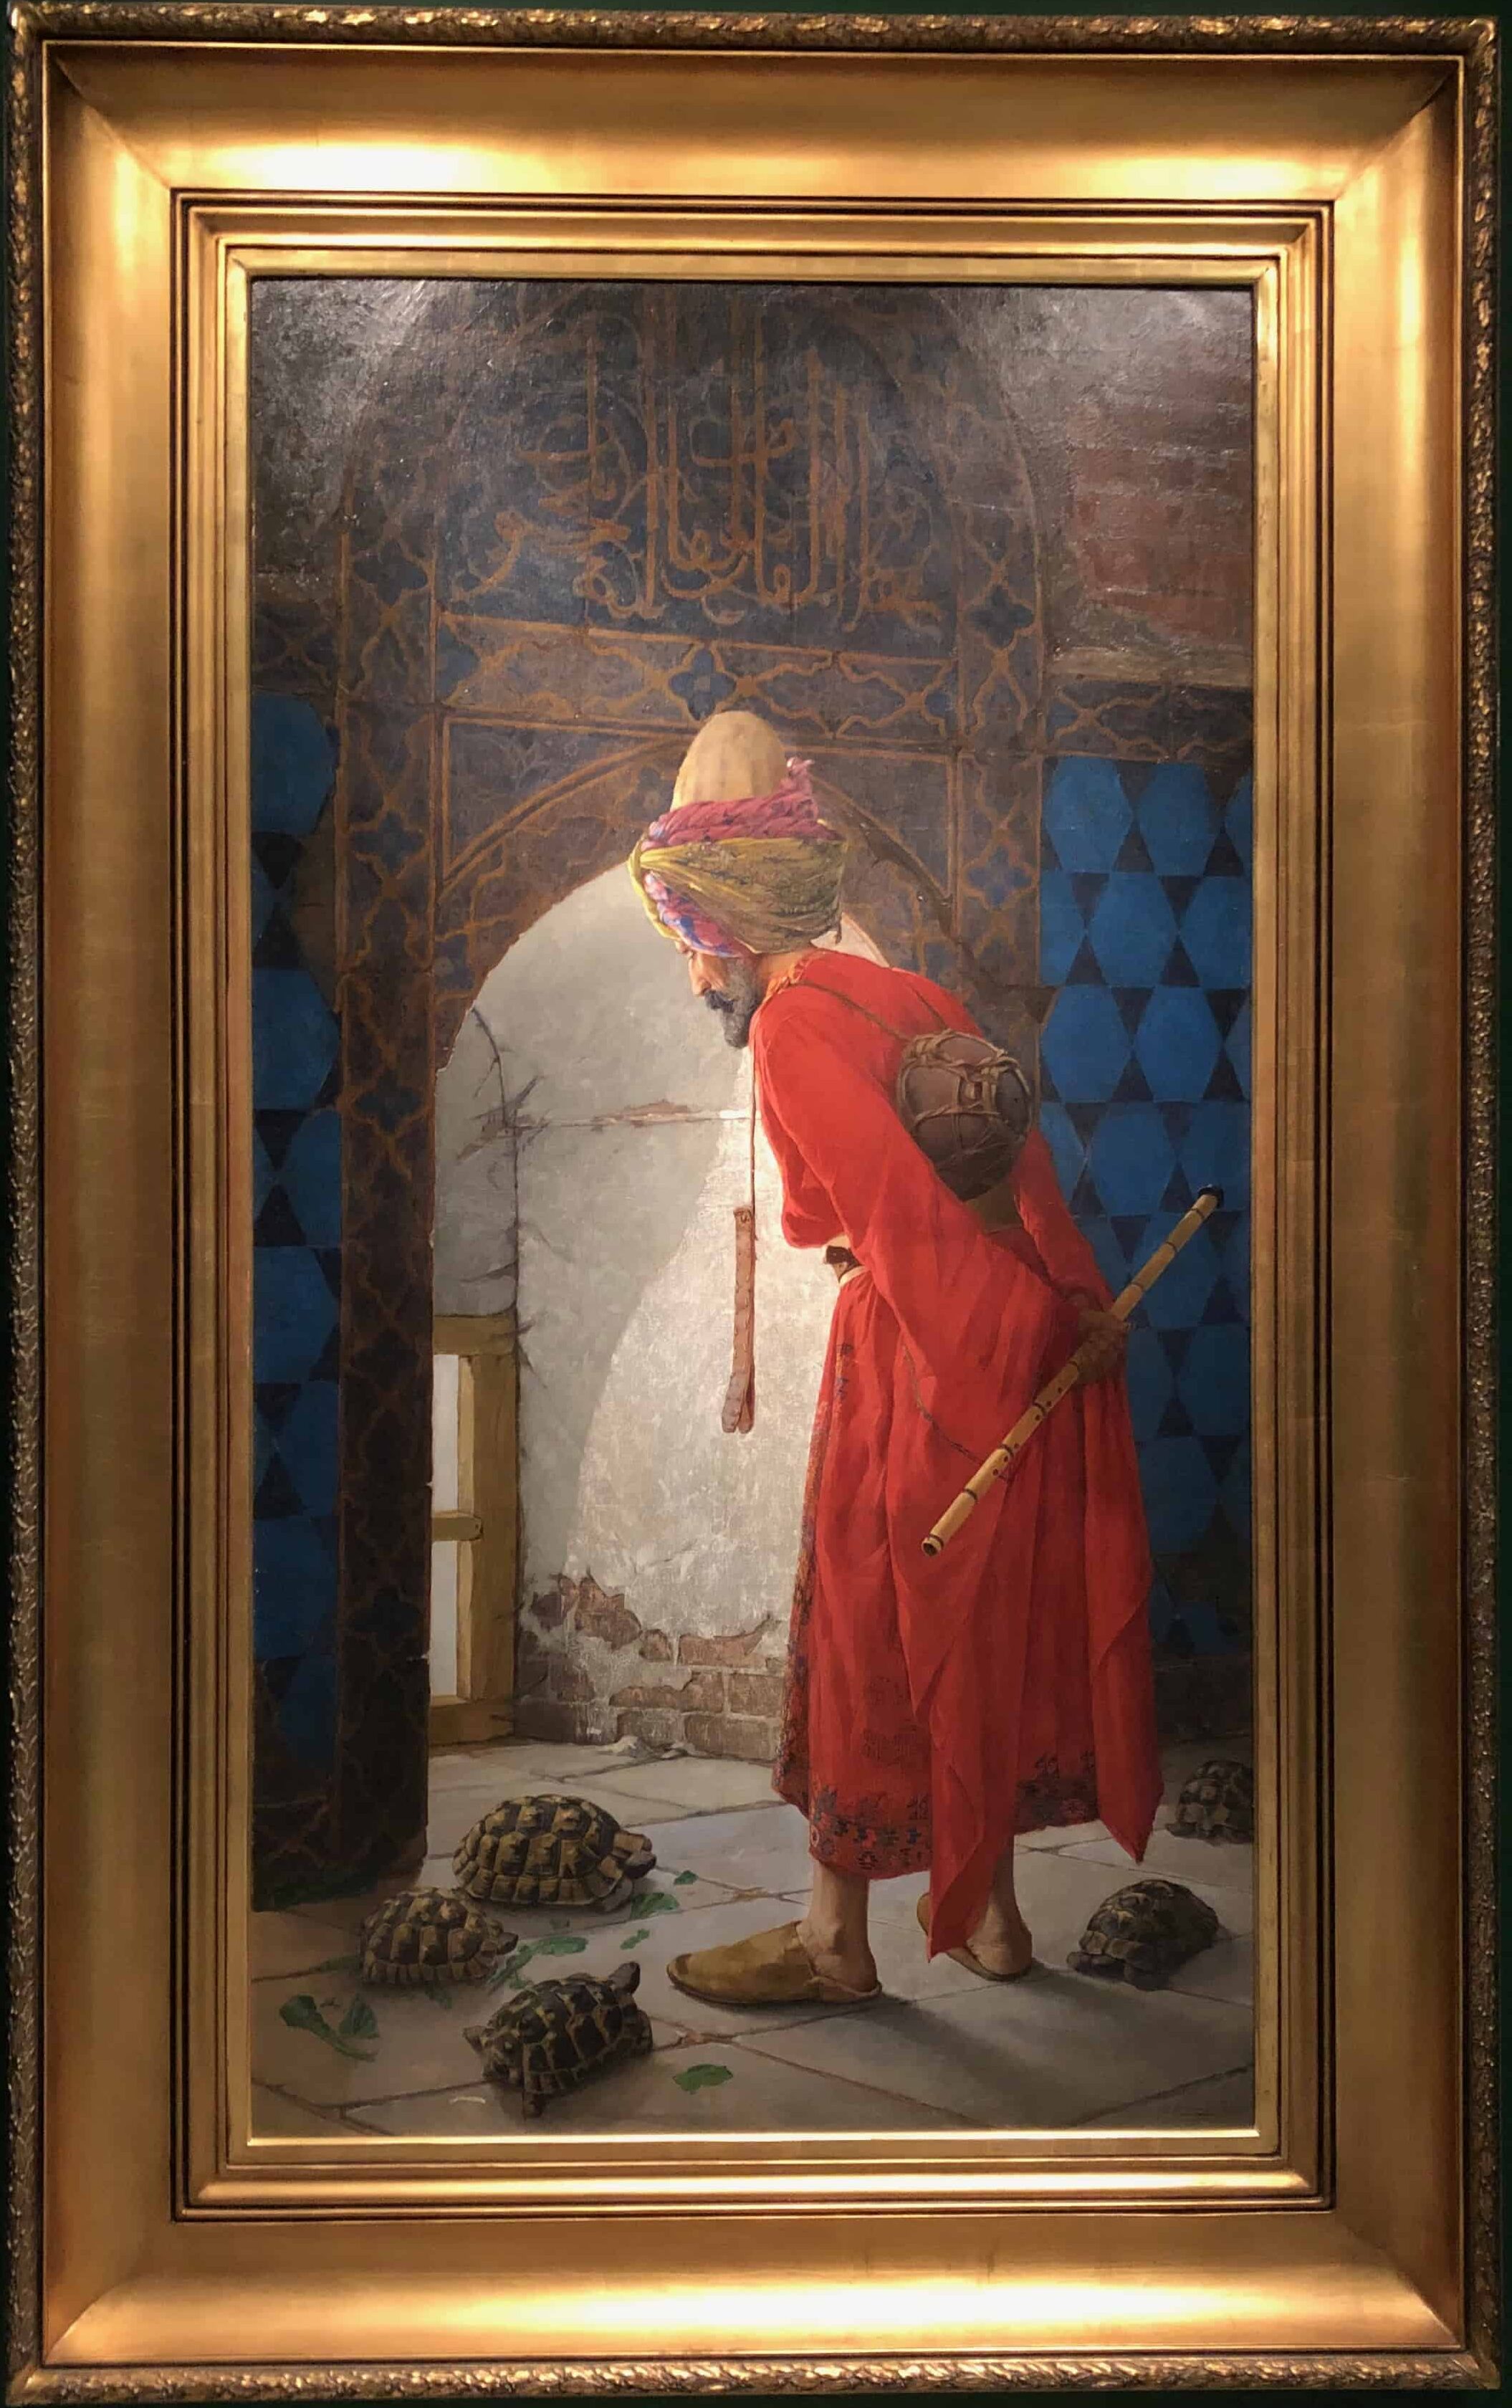 The Tortoise Trainer, Osman Hamdi Bey (1906) at the Pera Museum in Istanbul, Turkey